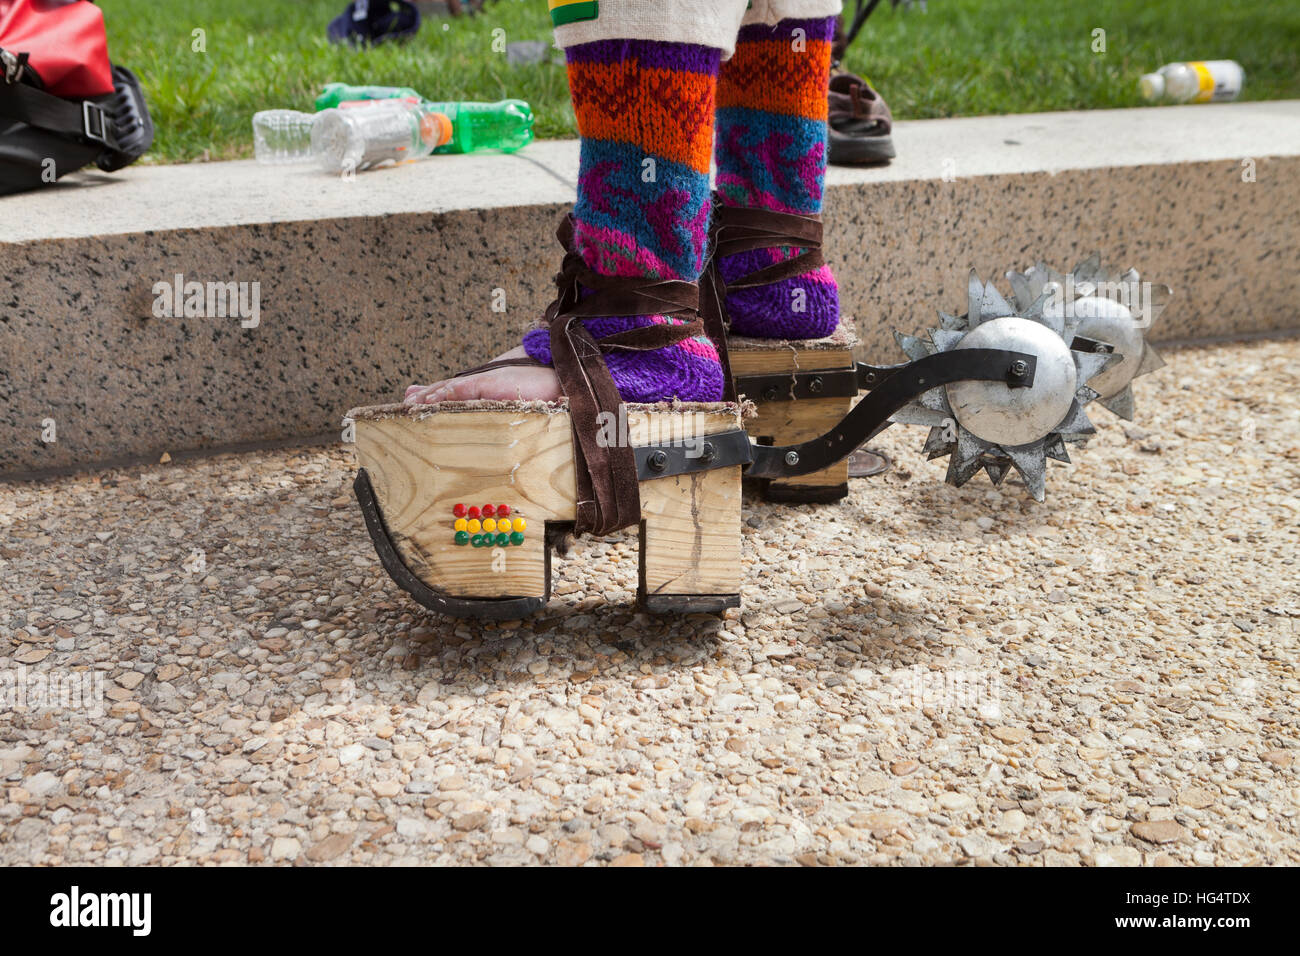 Wooden platform sandals and spurs on Pujllay dancer of the Quechuan people of Bolivia  - Washington, DC USA Stock Photo